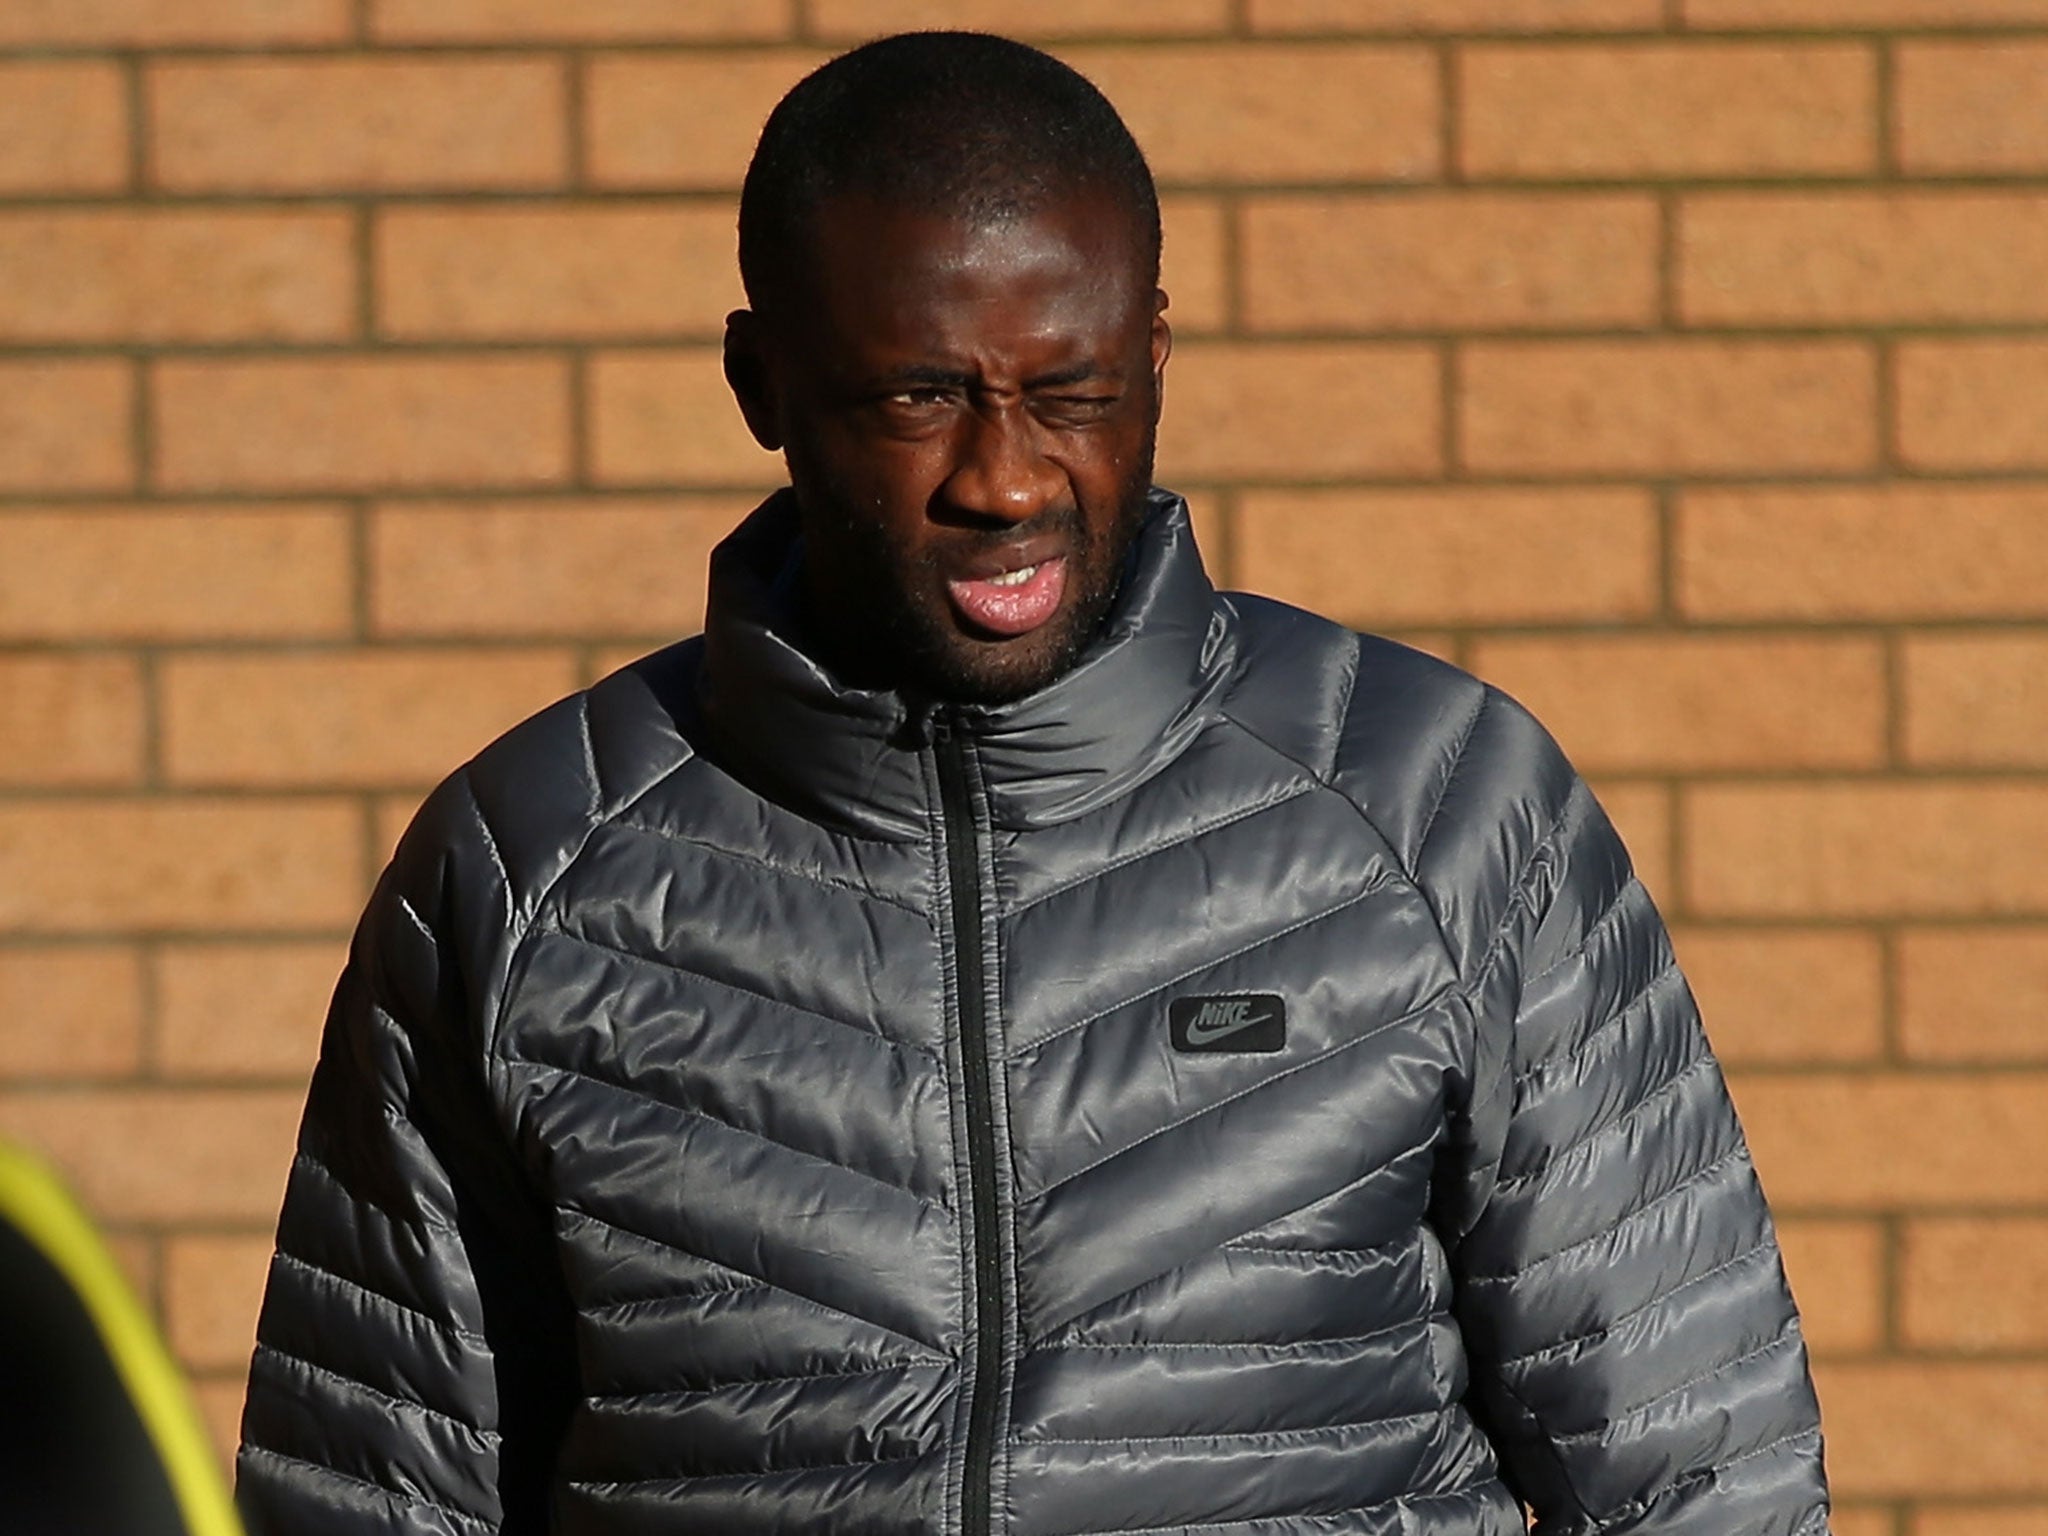 Yaya Toure was given a £54,000 fine and an 18-month driving ban after pleading guilty to drink-driving